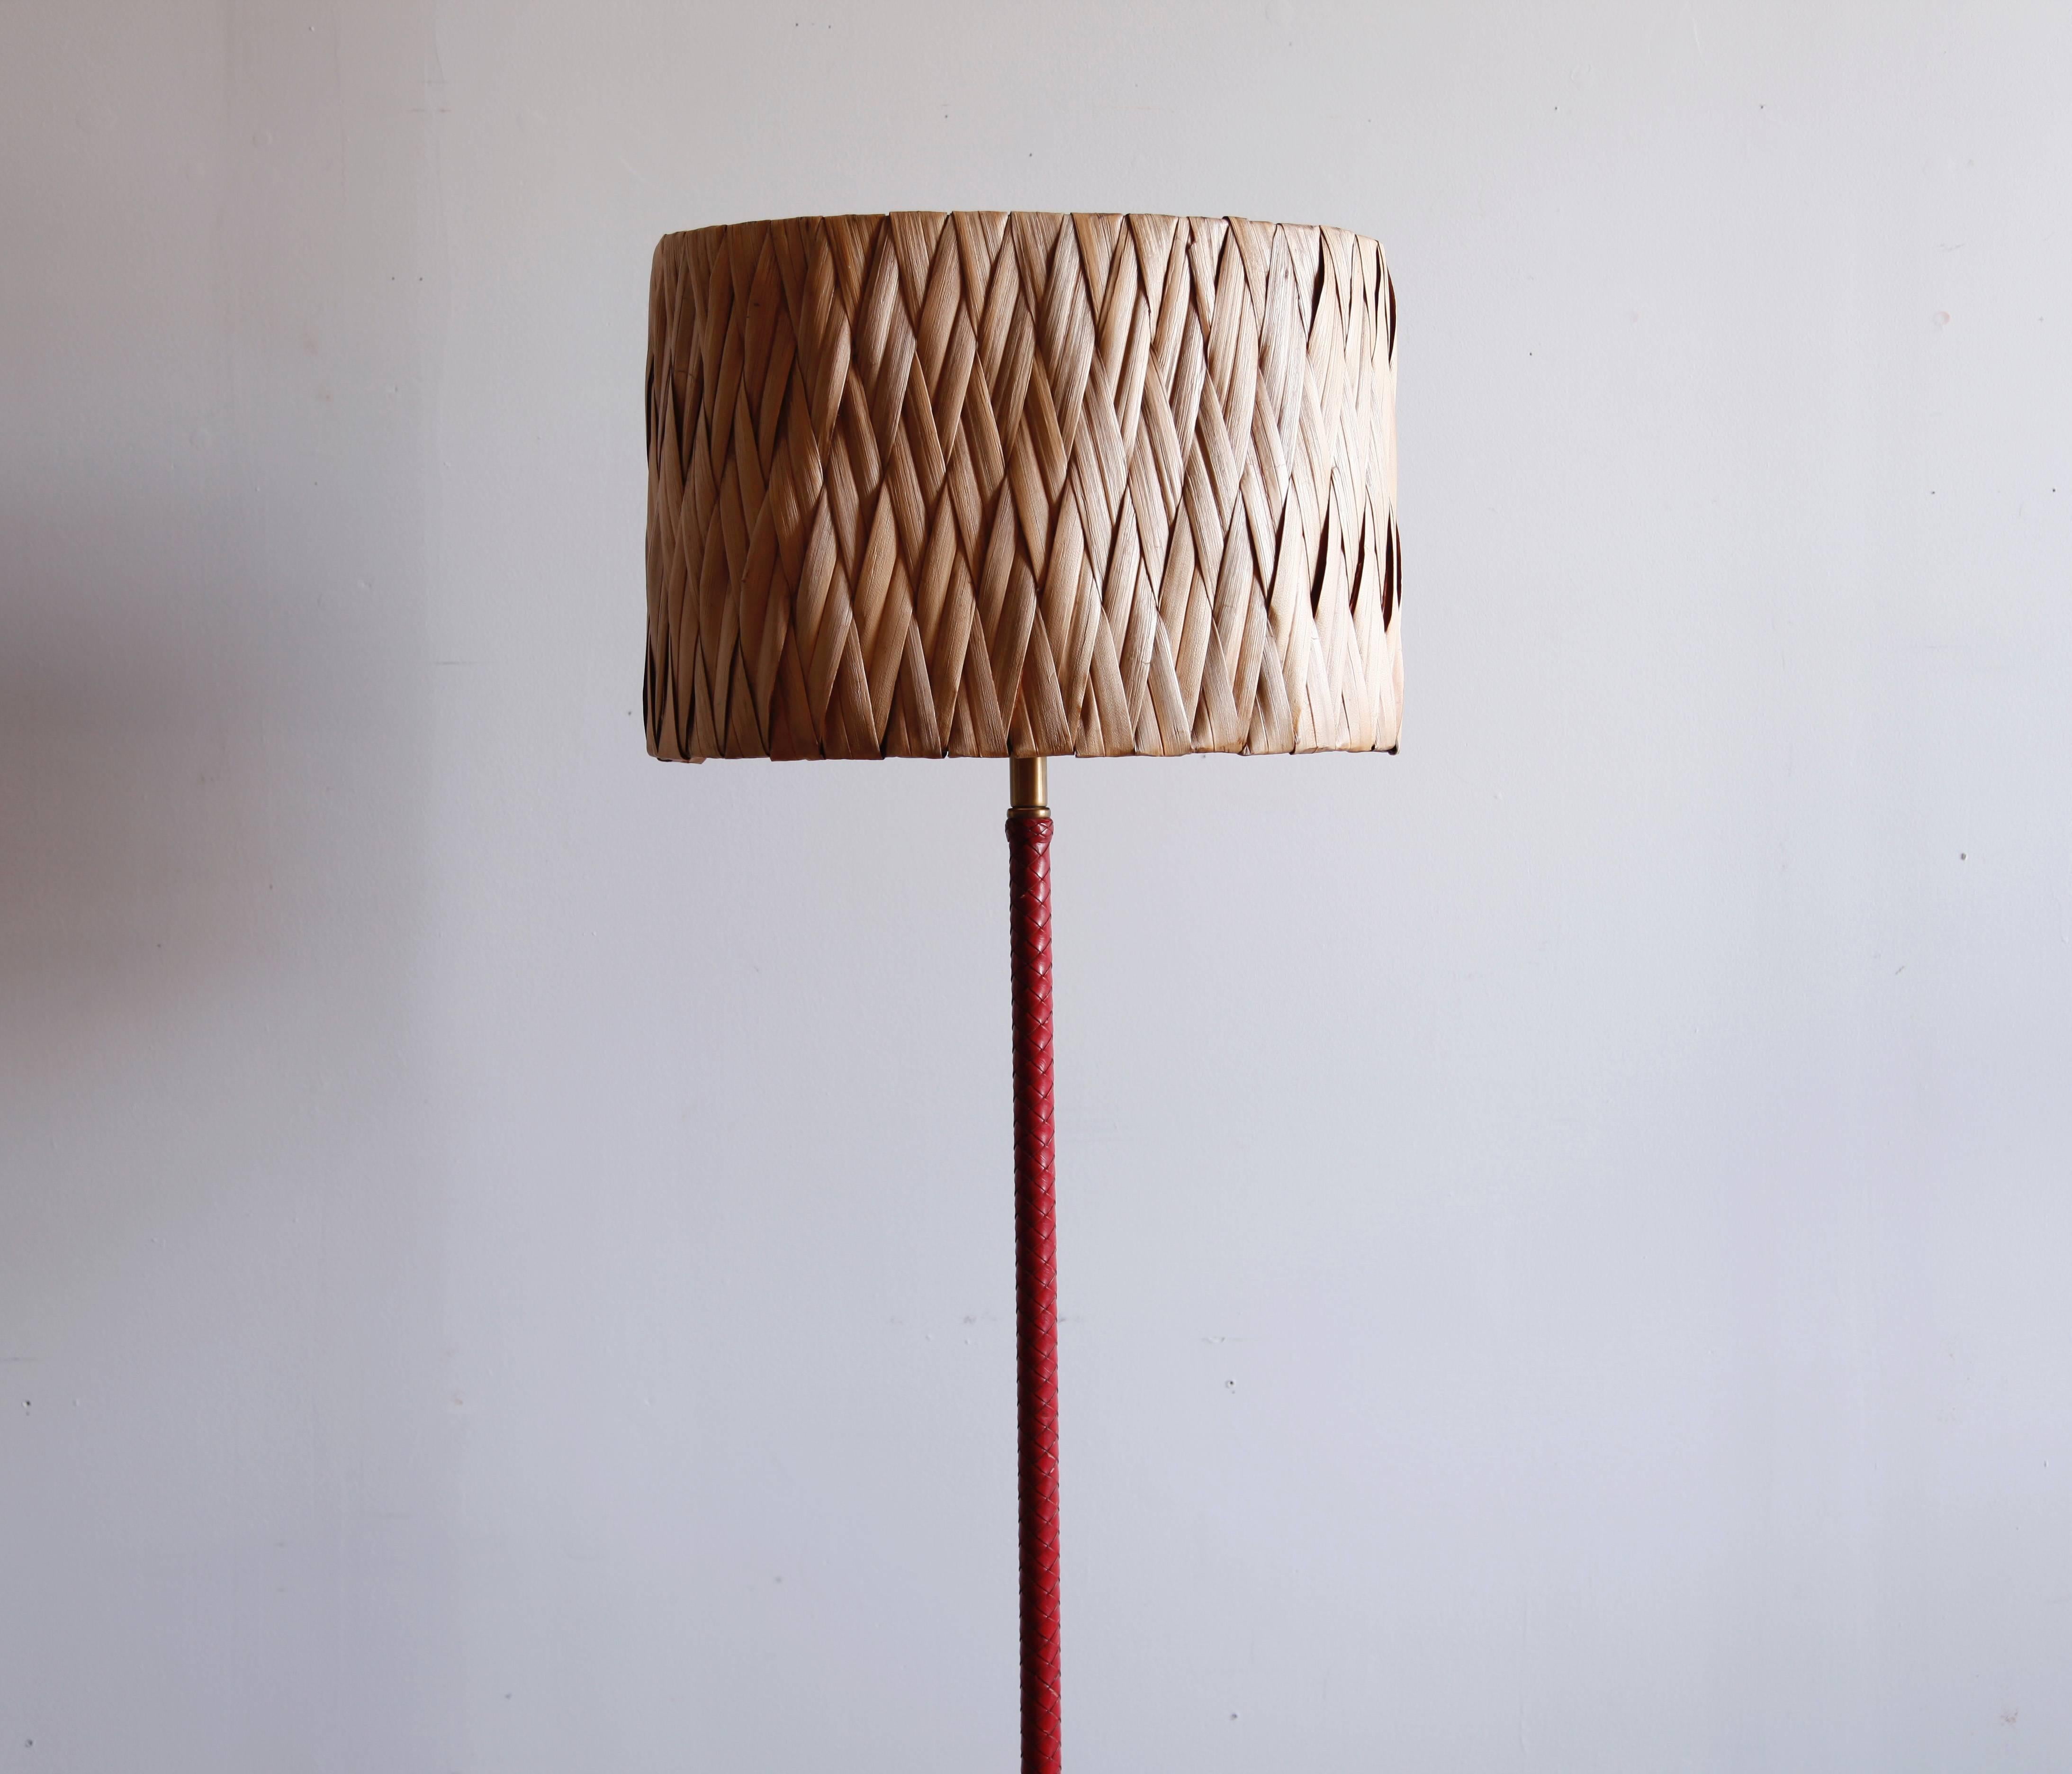 The leather braided over the brass stem of this lamp is an appealing oxblood color. Height is adjustable by a few inches. The vintage shade, braided palm leaf, is not sold with the lamp but pairs beautifully with it.